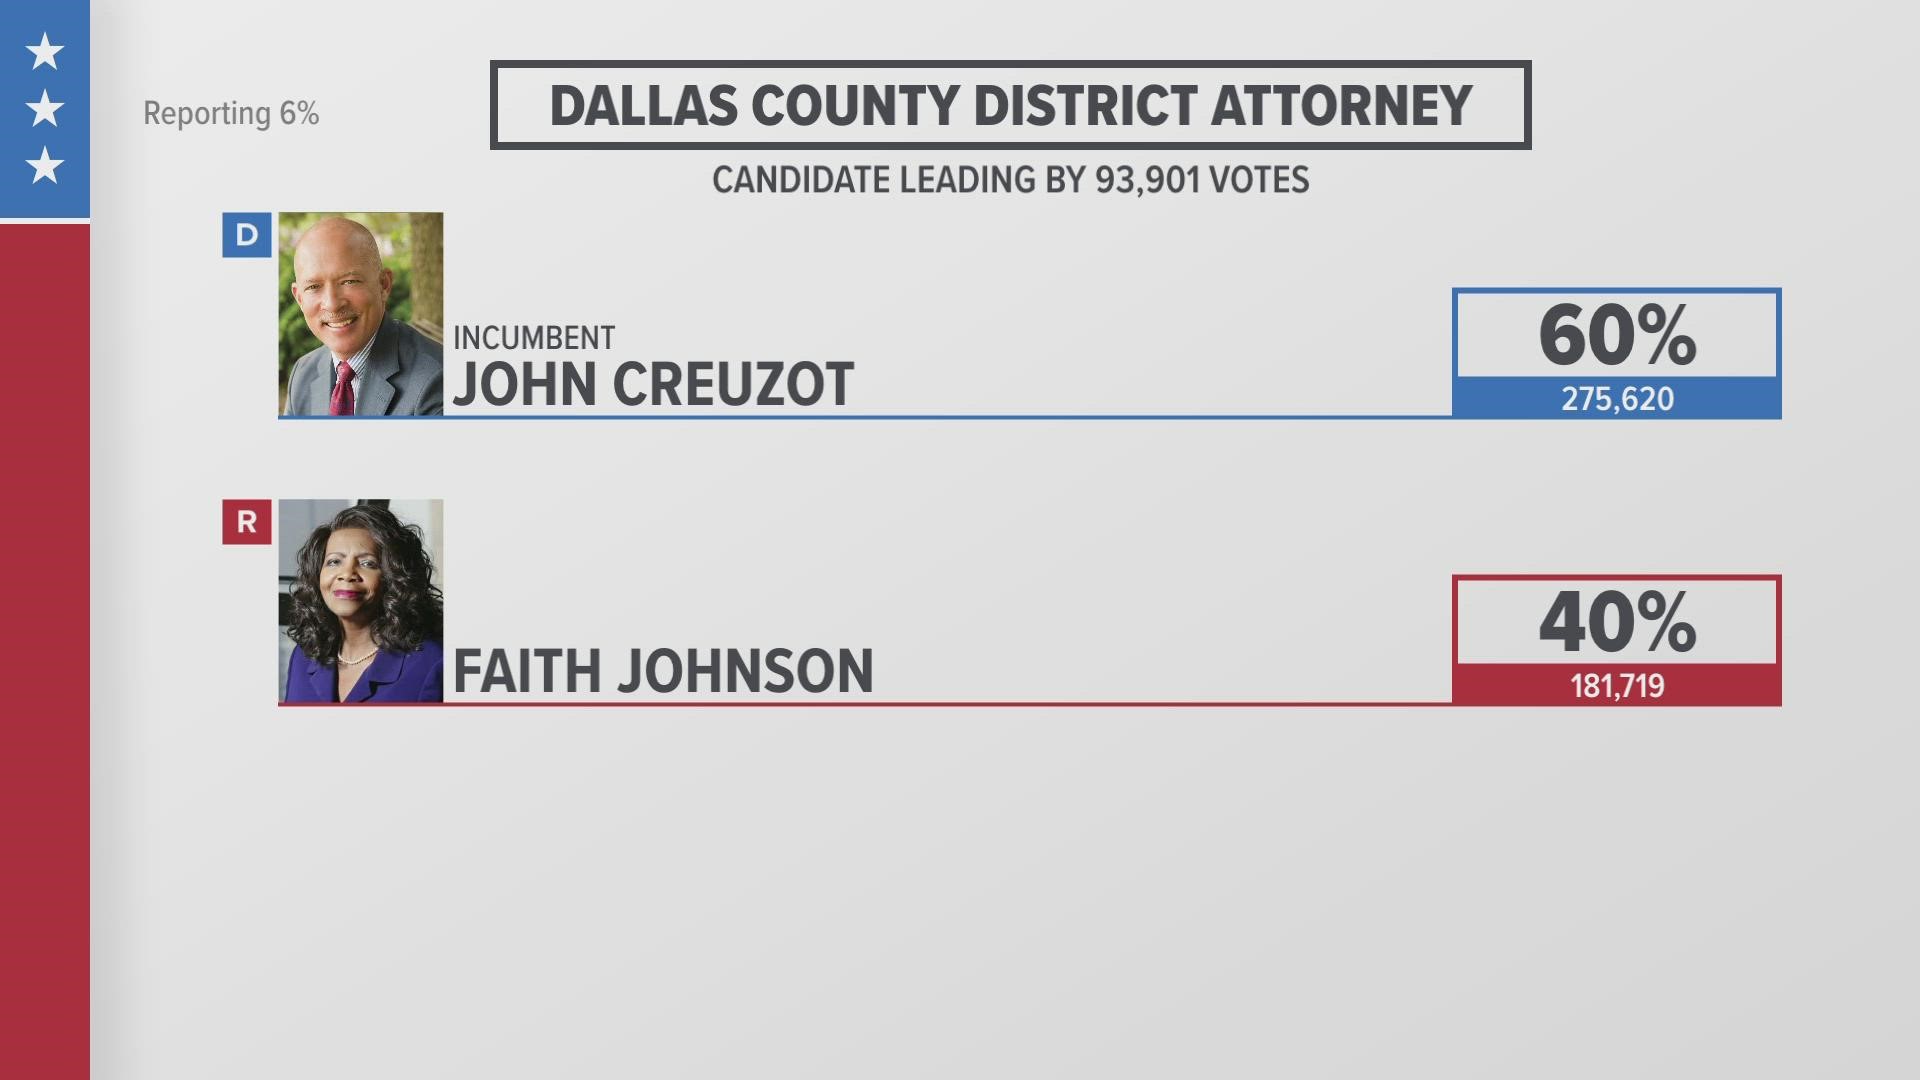 Creuzot is looking to keep his seat from Johnson, who is a former Dallas County district attorney.